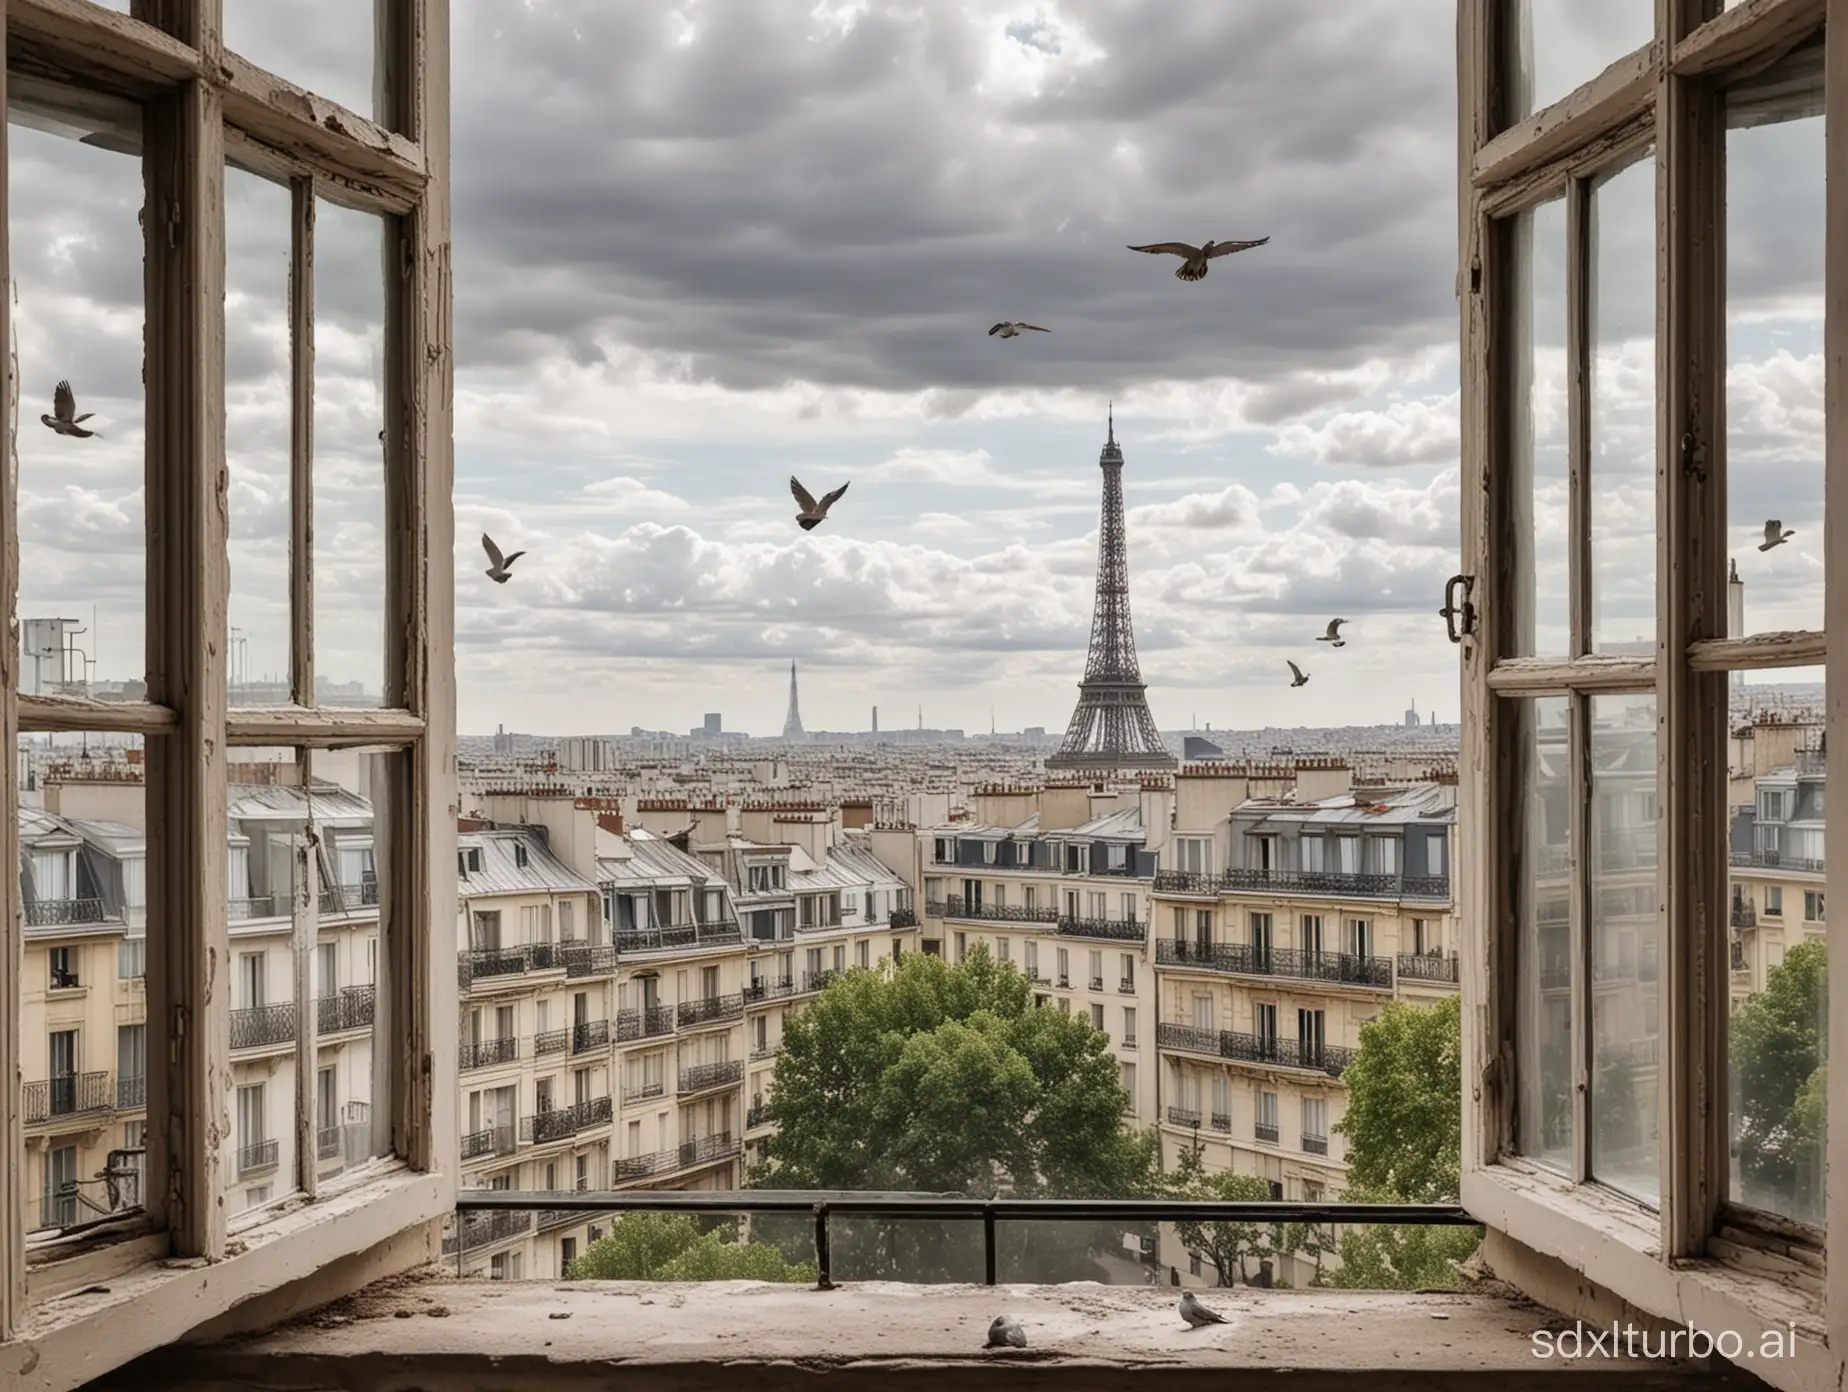 a window open from an apartment onto a landscape representing the rooftops of Paris. It is nice weather with some white clouds.. In the distance, the Eiffel Tower, some pigeons can be seen. The atmosphere is noisy and agitated